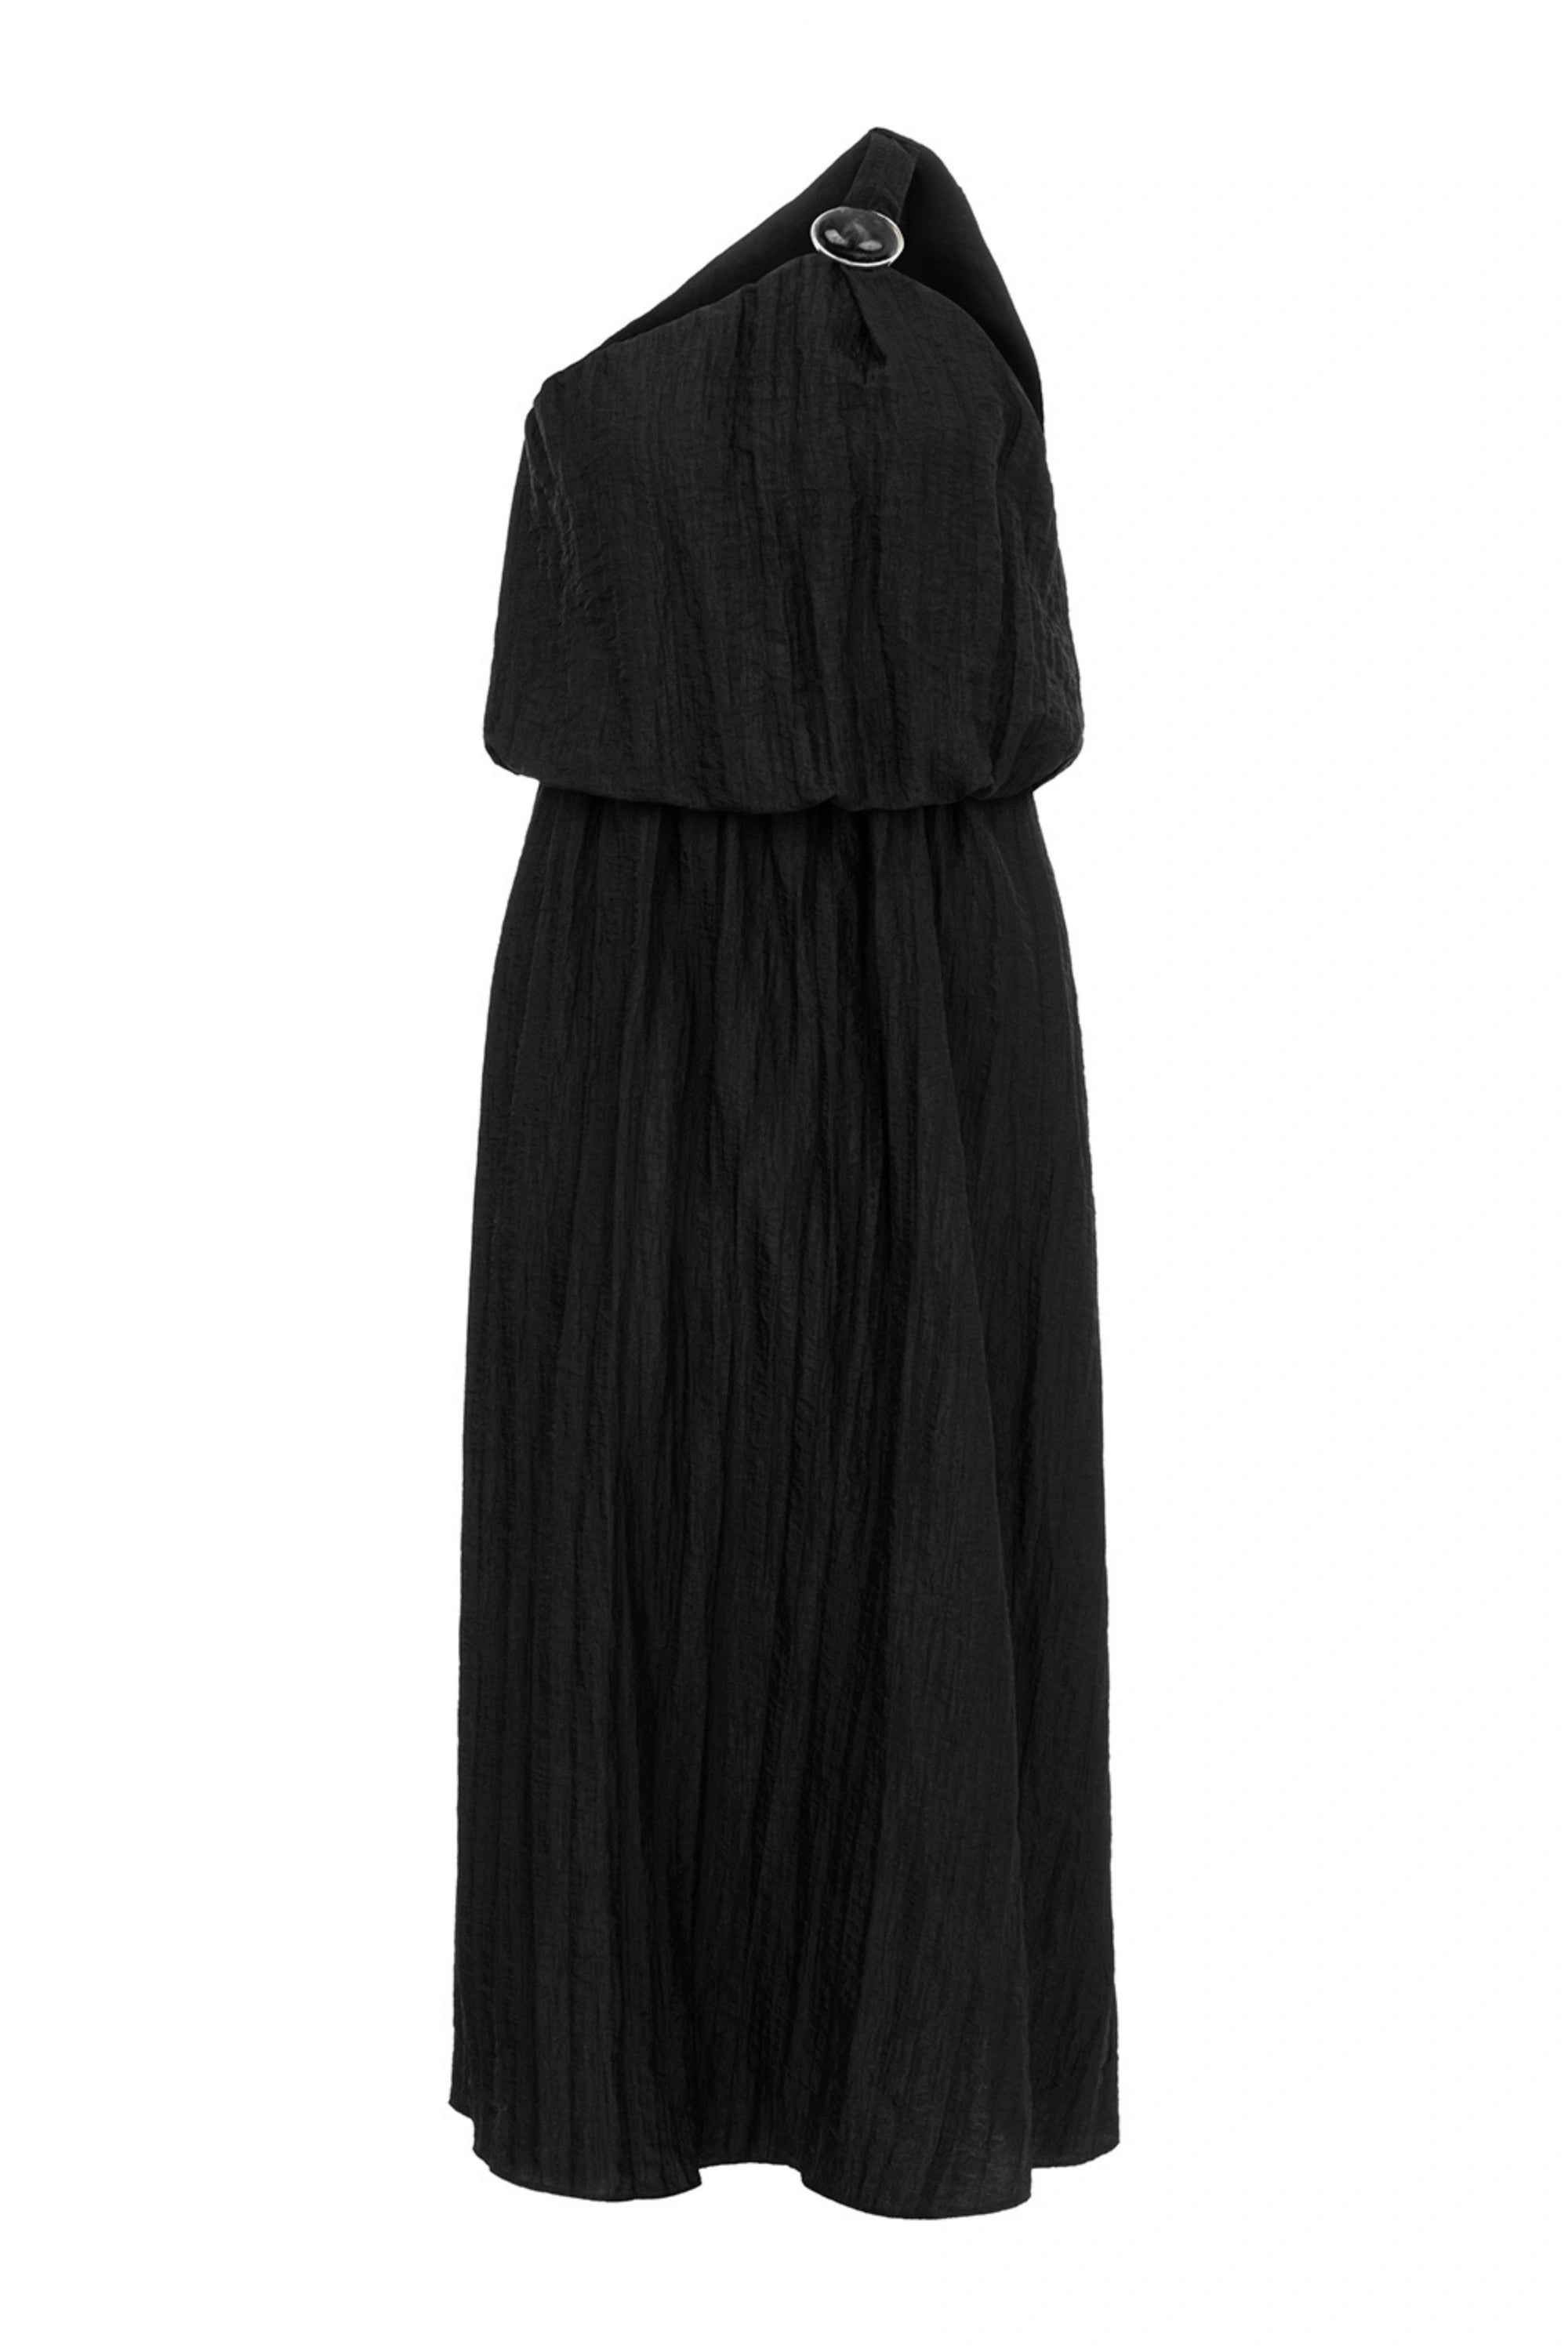 Nocturne Women's One Sleeve Dress With Accessory Detail-black